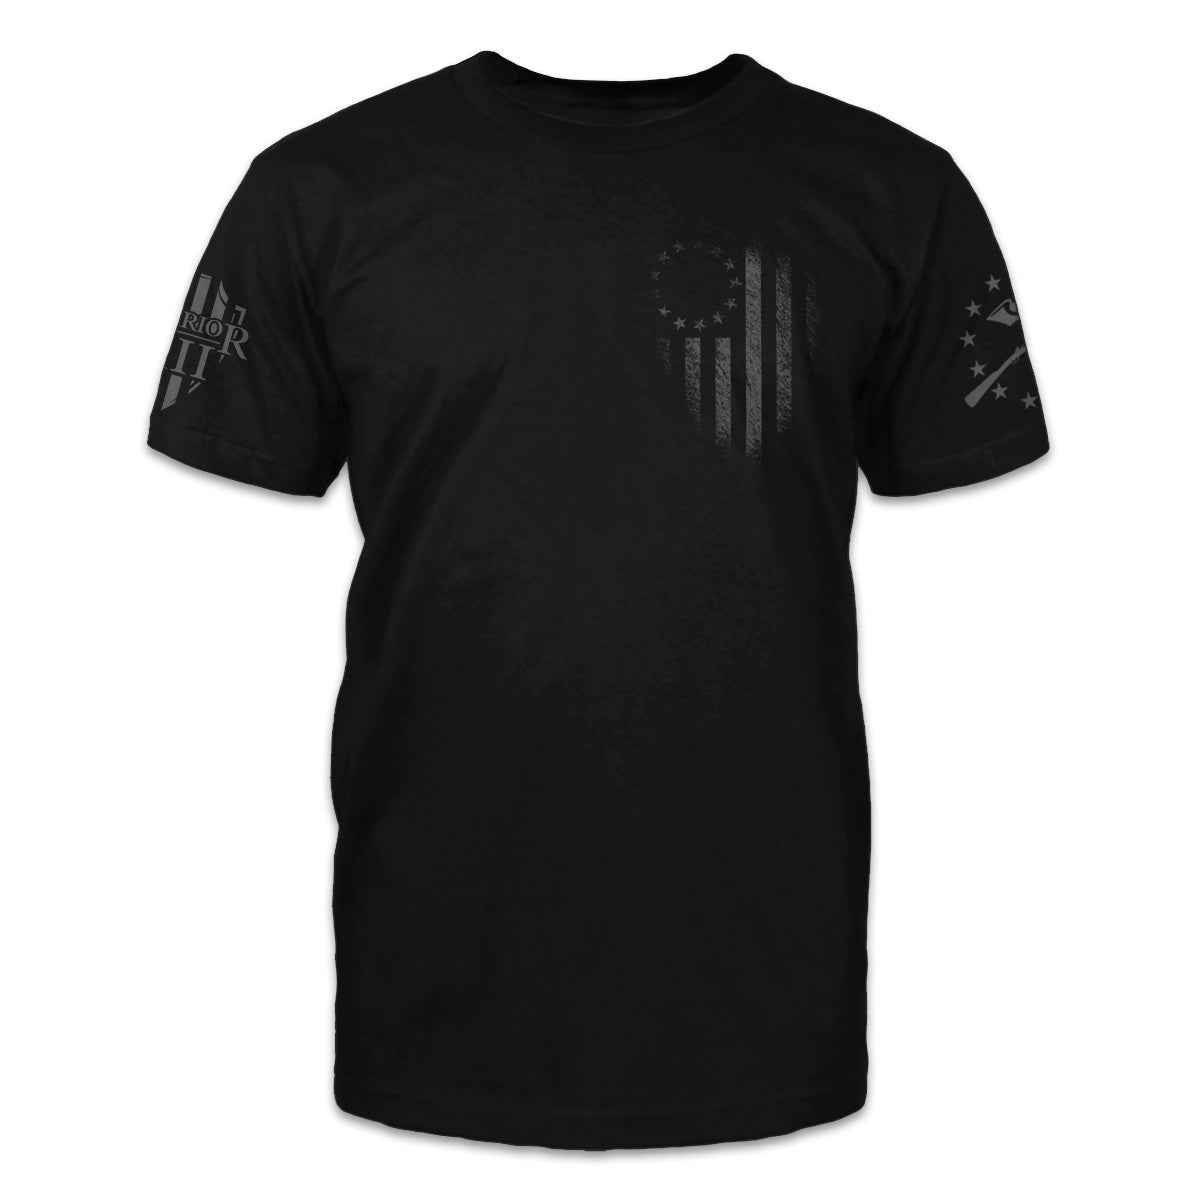 A black t-shirt with the betsy ross flag printed on the front of the shirt.